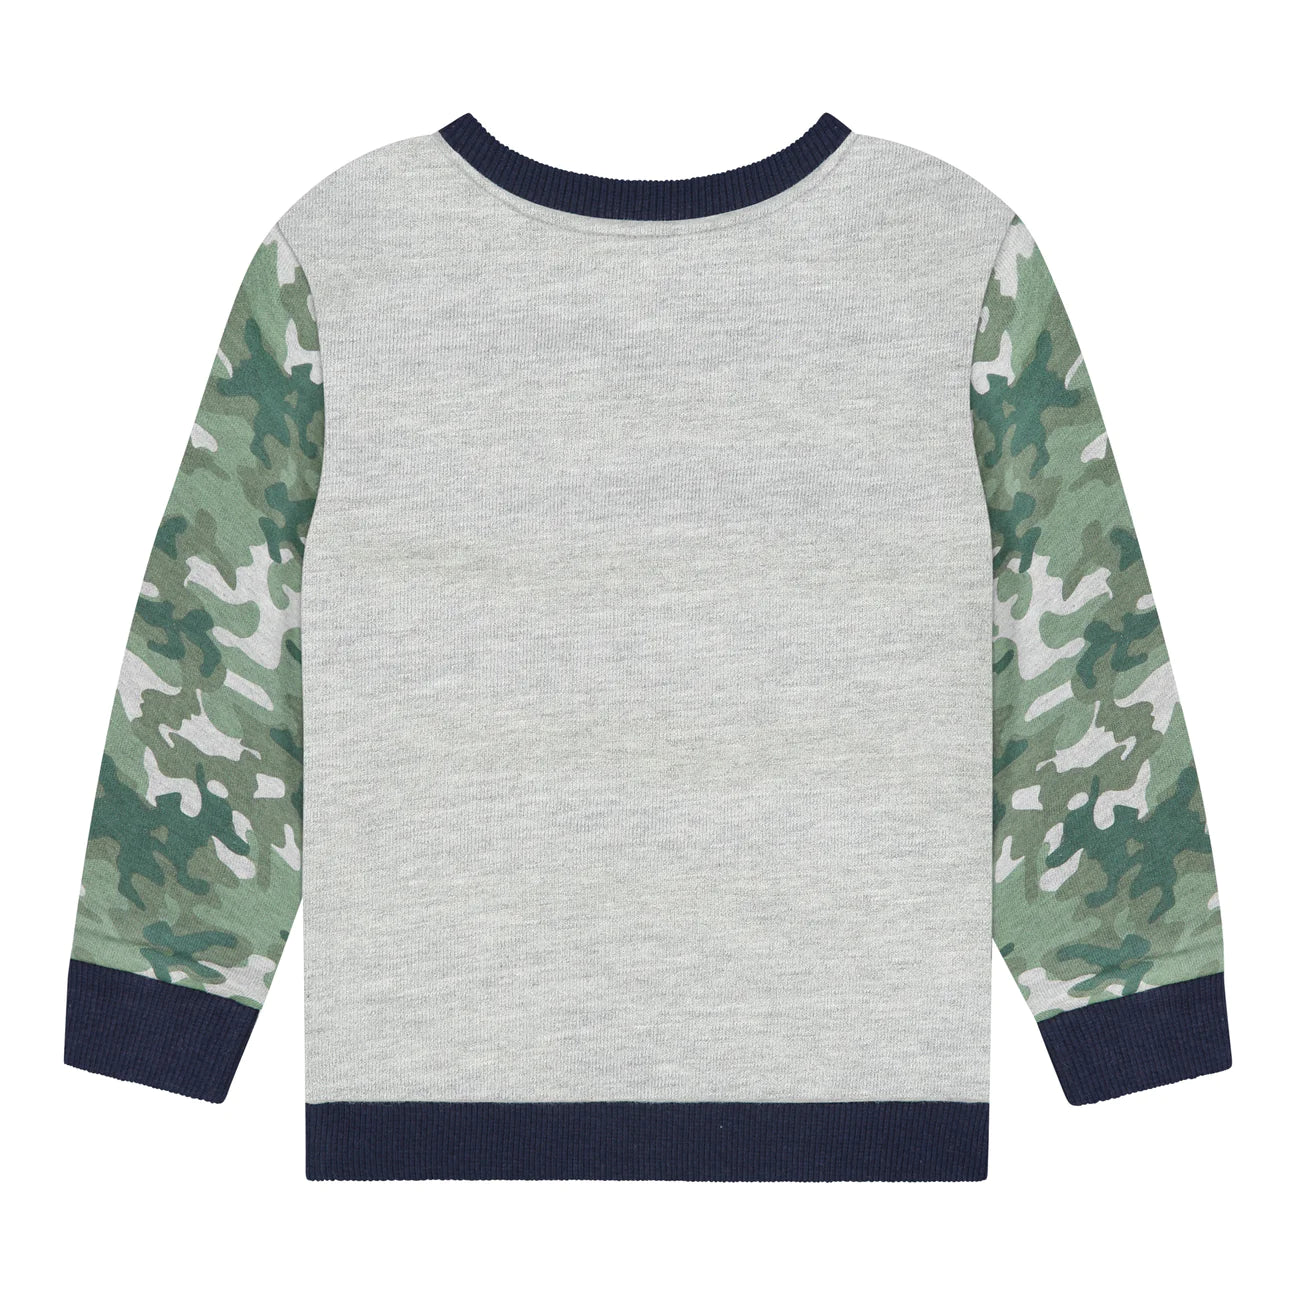 French Terry Set - Camo